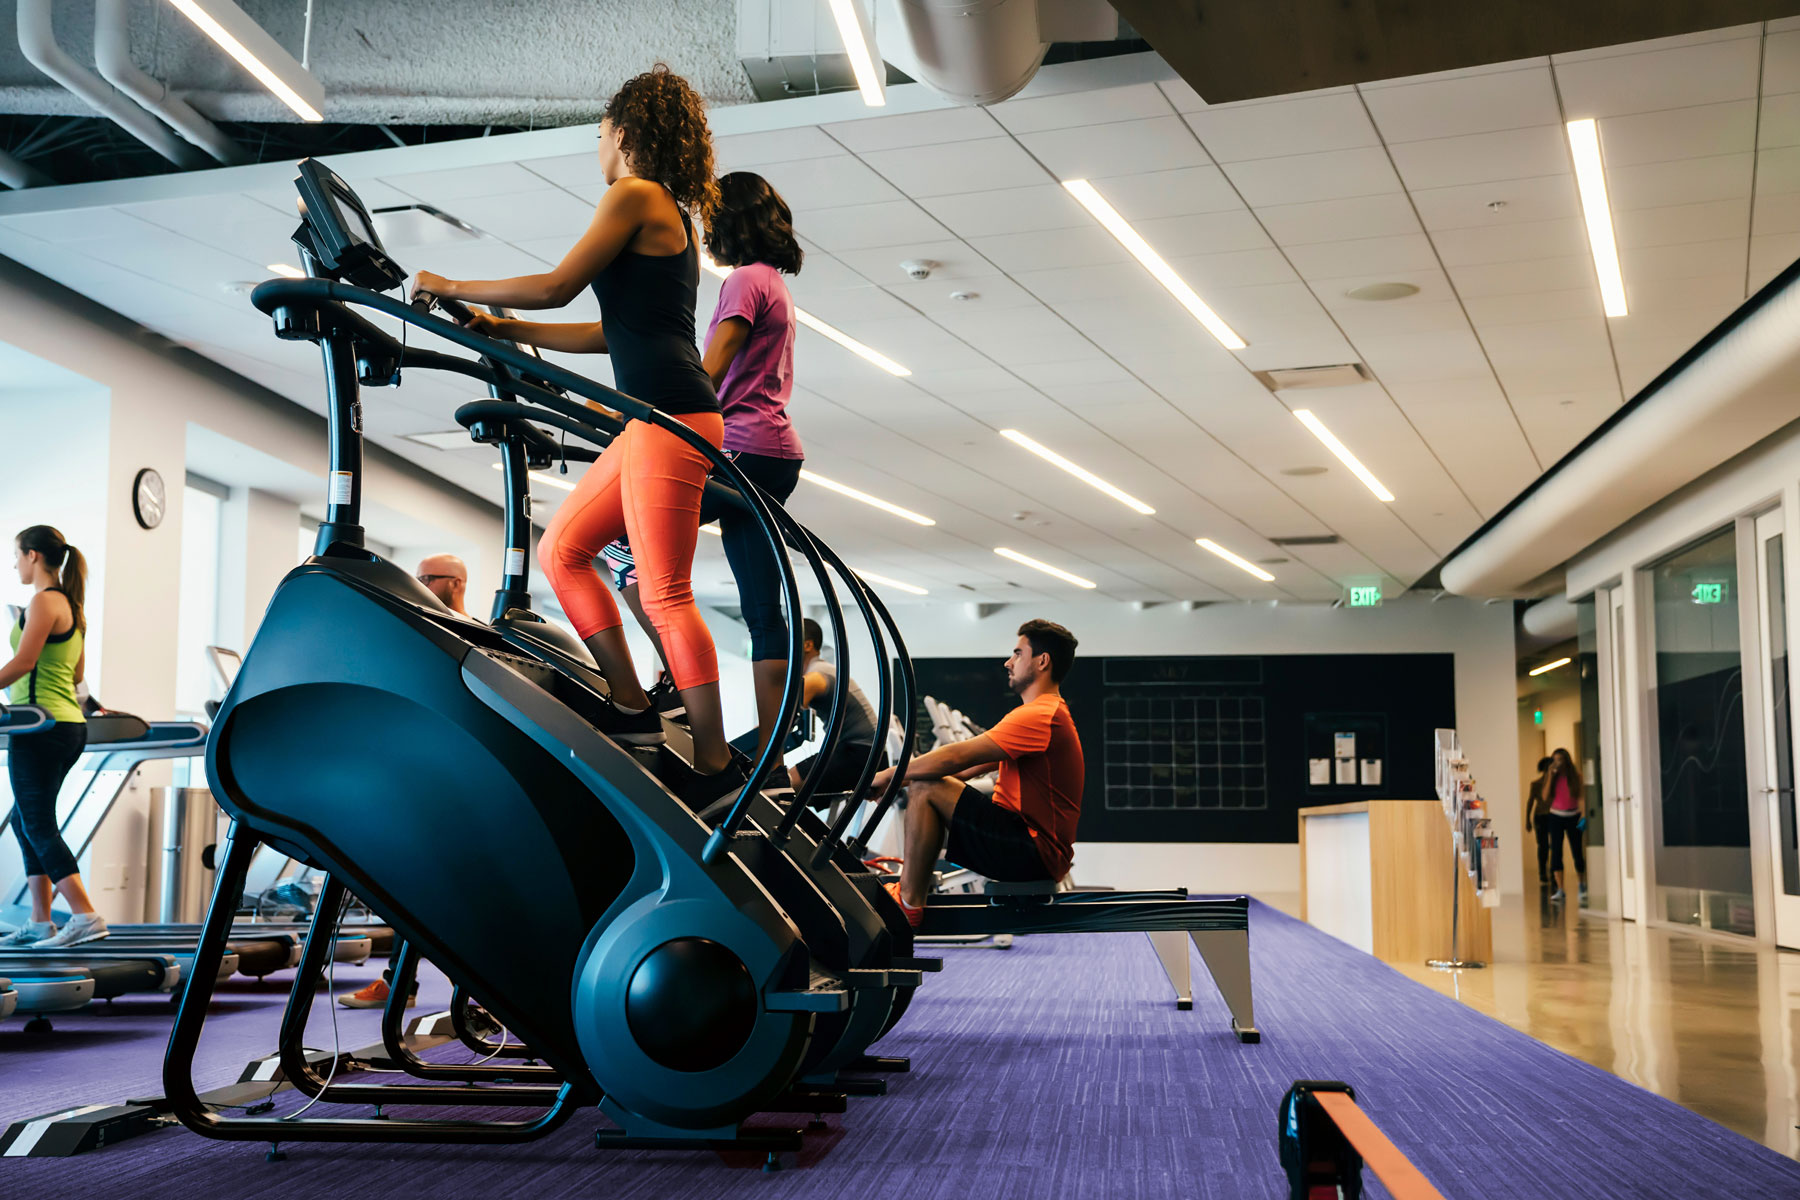 6 REASONS YOU SHOULD DO A STAIR CLIMBER WORKOUT REGULARLY